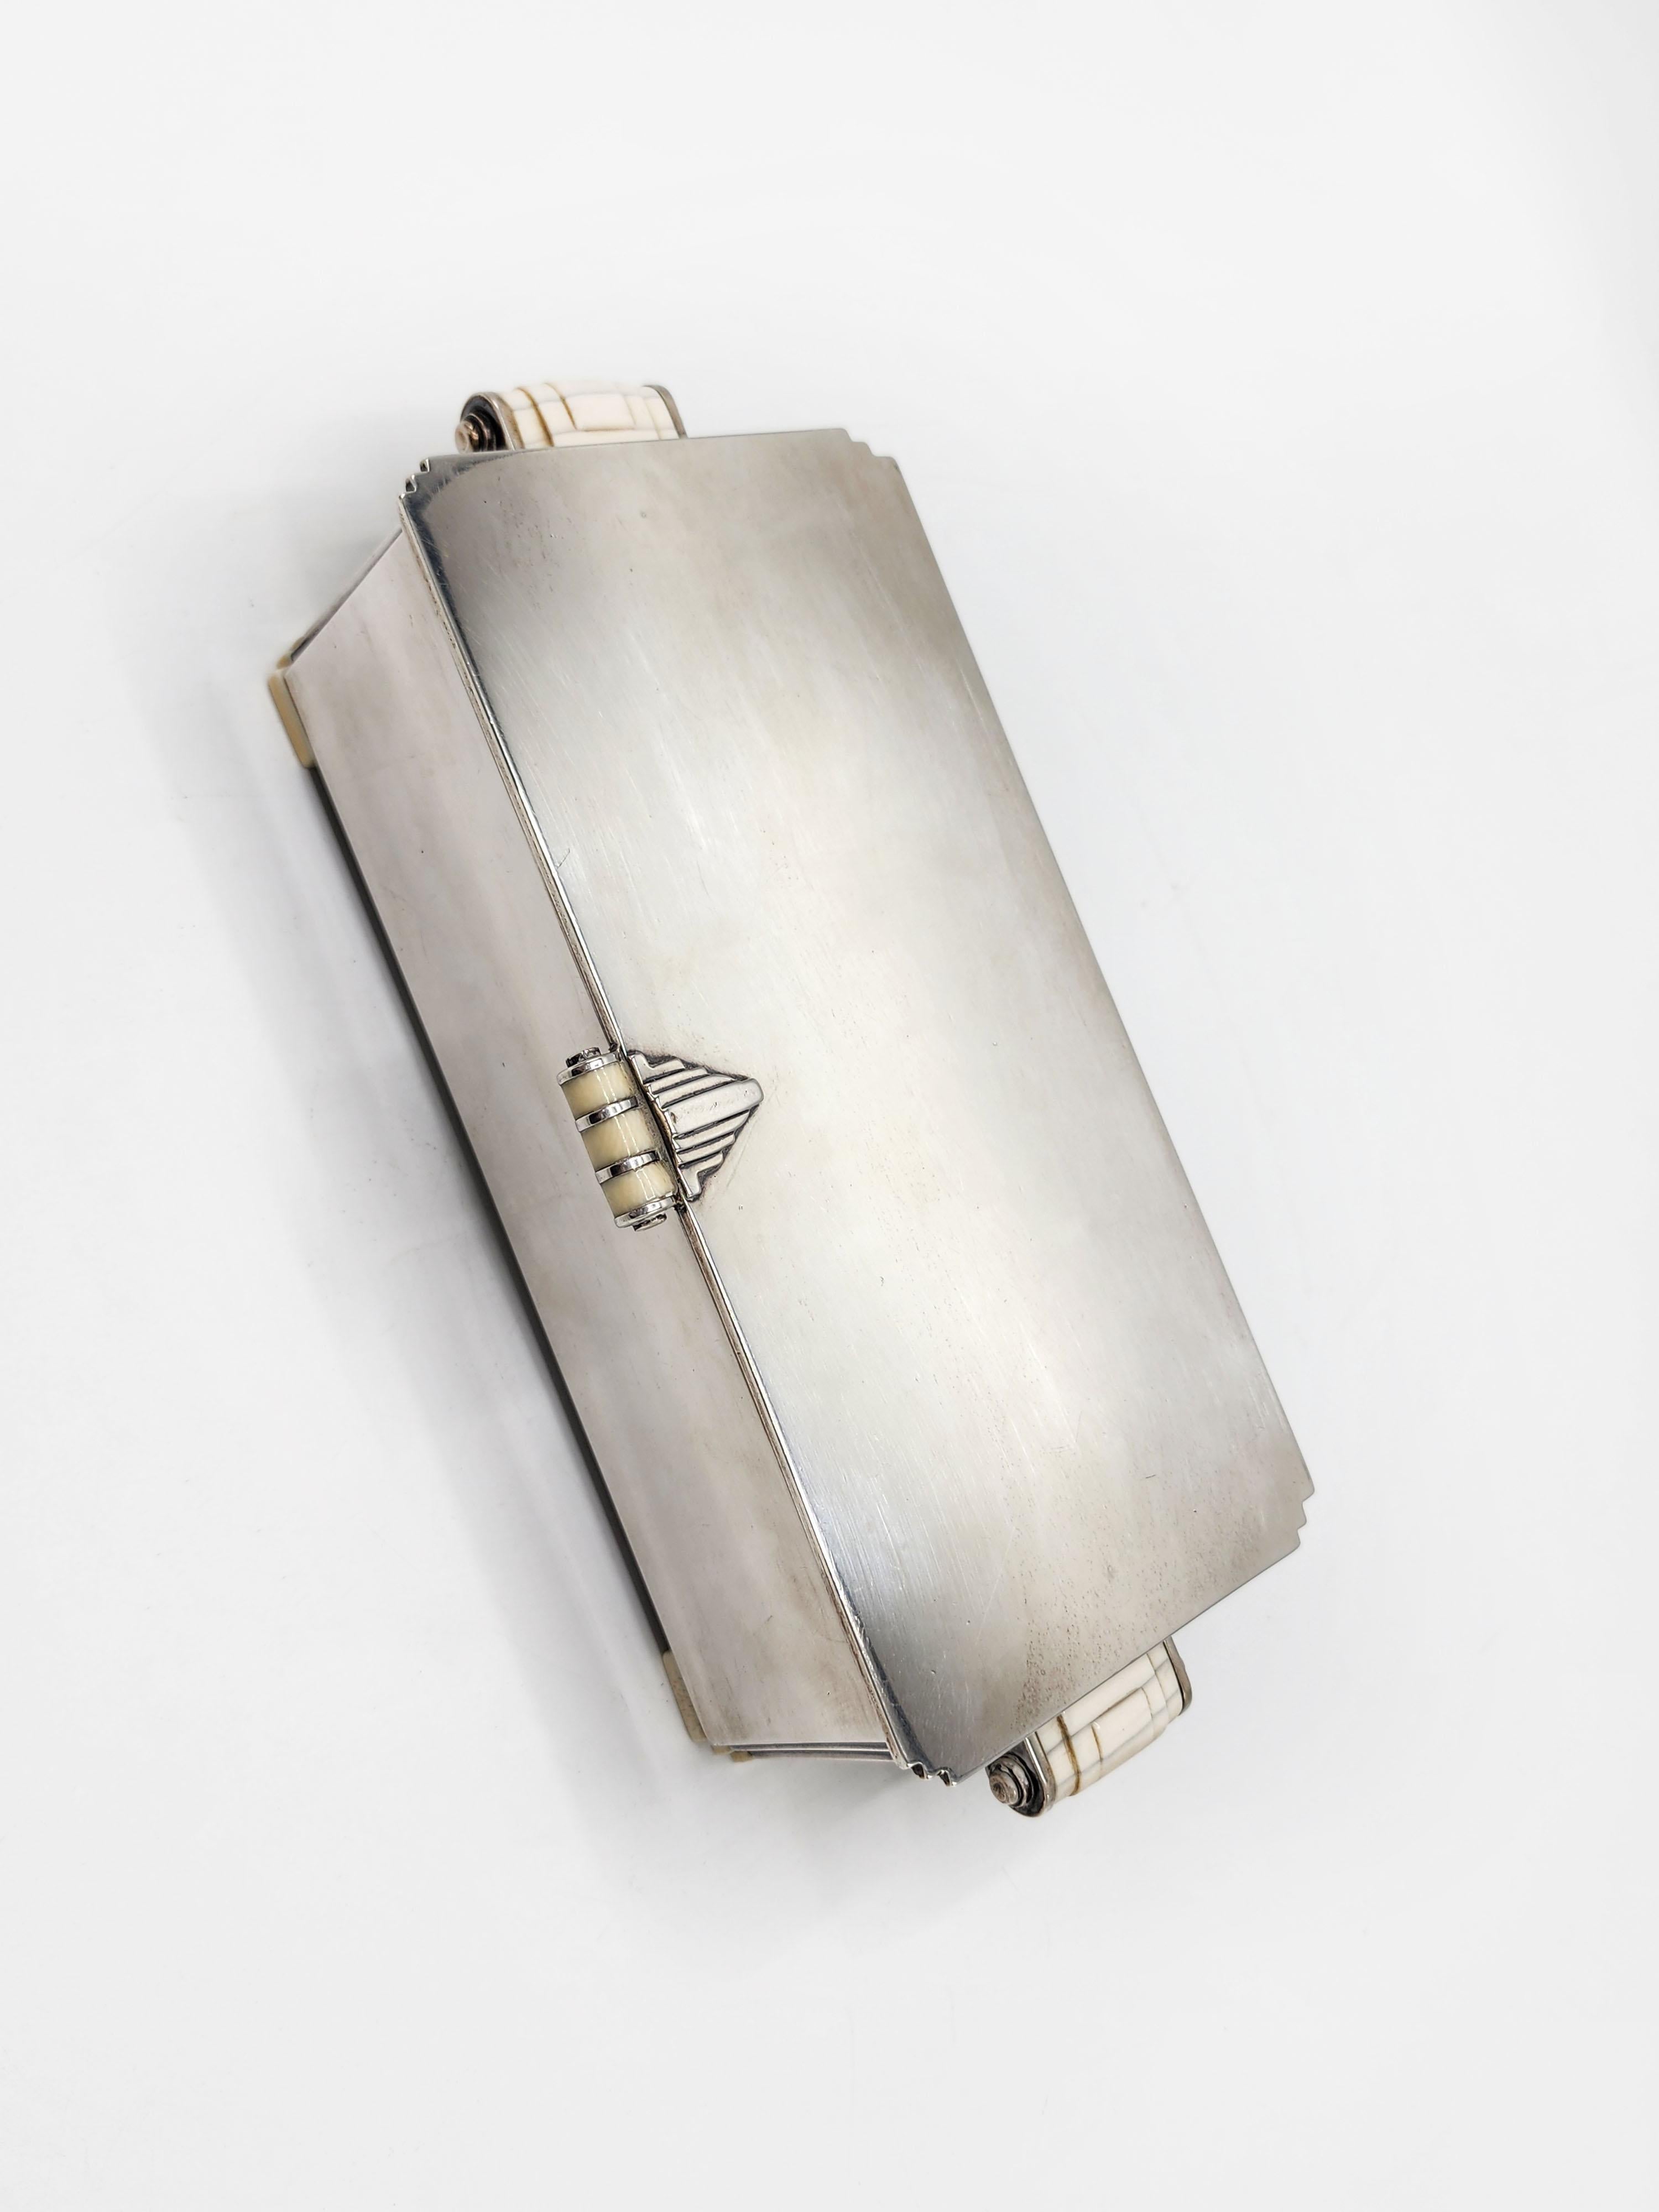 Antique Art Deco Sterling Silver Tobacco Box In Good Condition For Sale In Autonomous City Buenos Aires, CABA